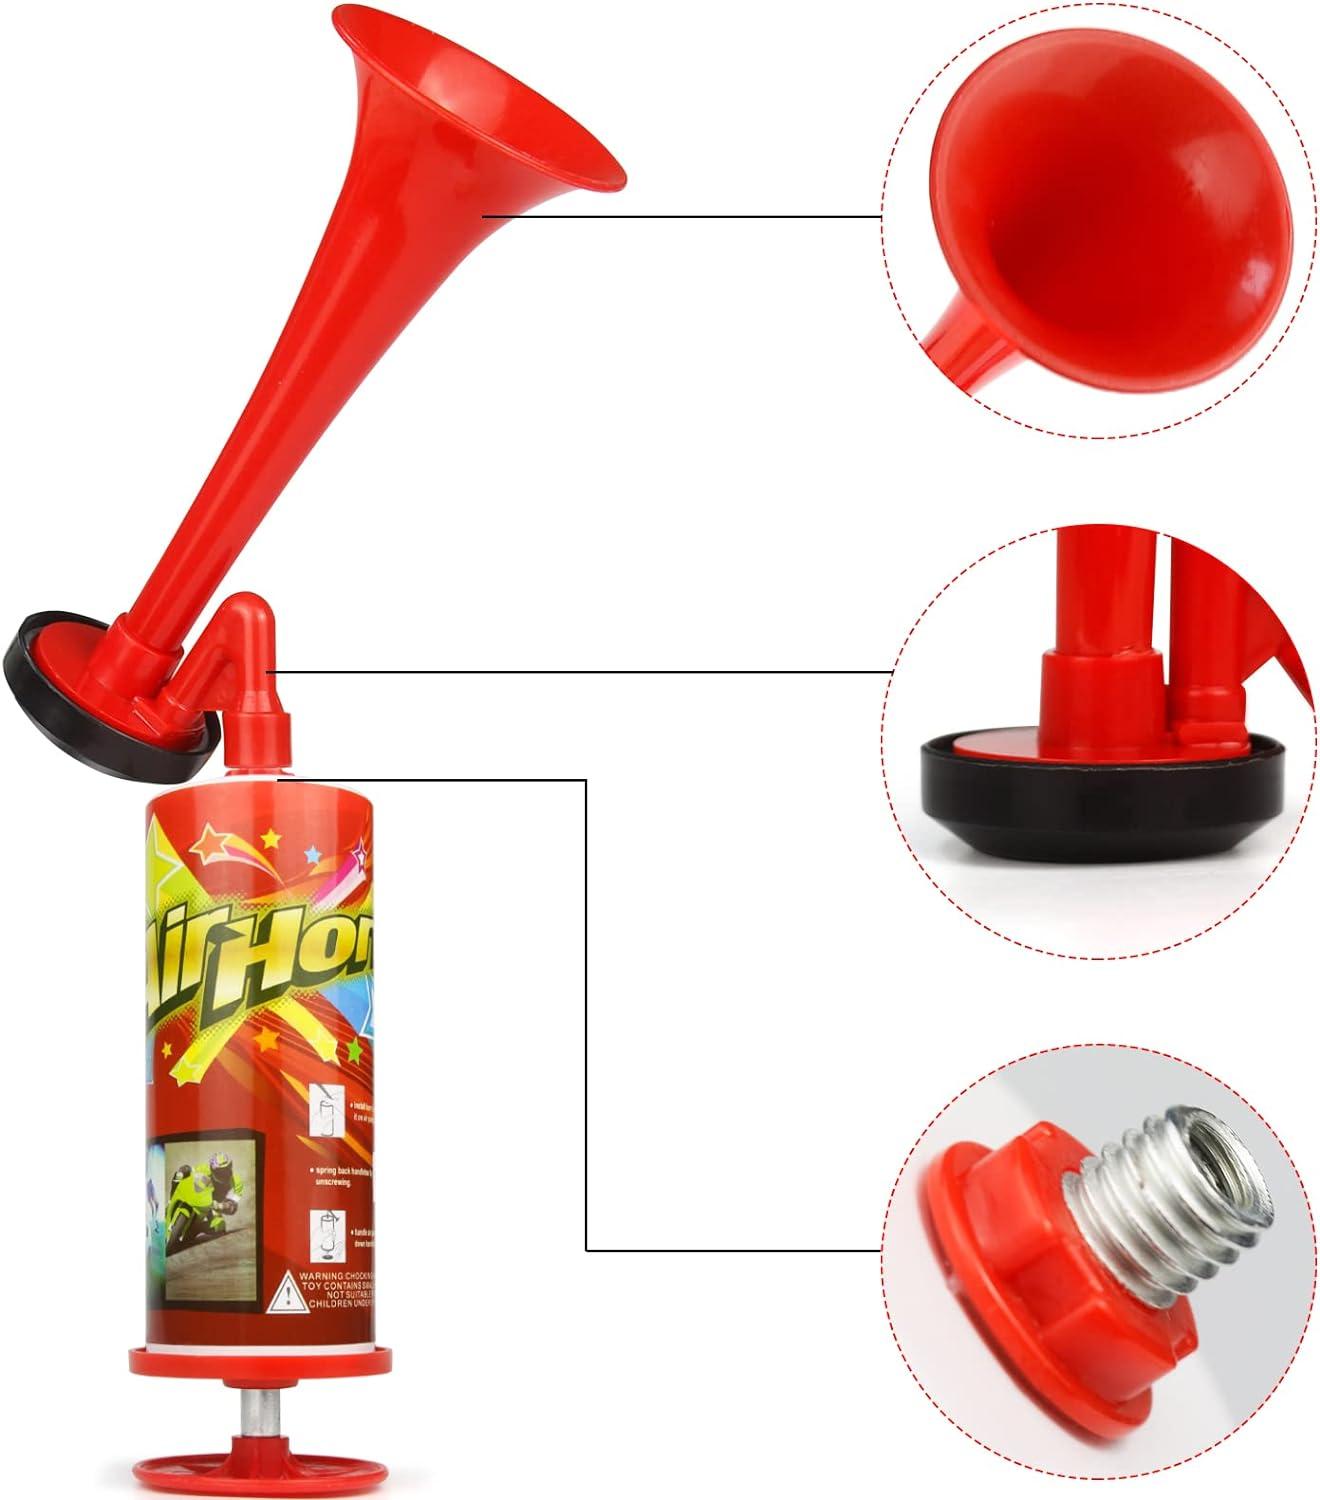 Handpush Pump Blast Air Horn HELESIN Handheld Aluminum Air Horn Gas Free  Blow Horn Loud Sound for Emergency Warning Boating Camping Party Supplies  Xmas Holiday Celebration Favors 1 PACK Large